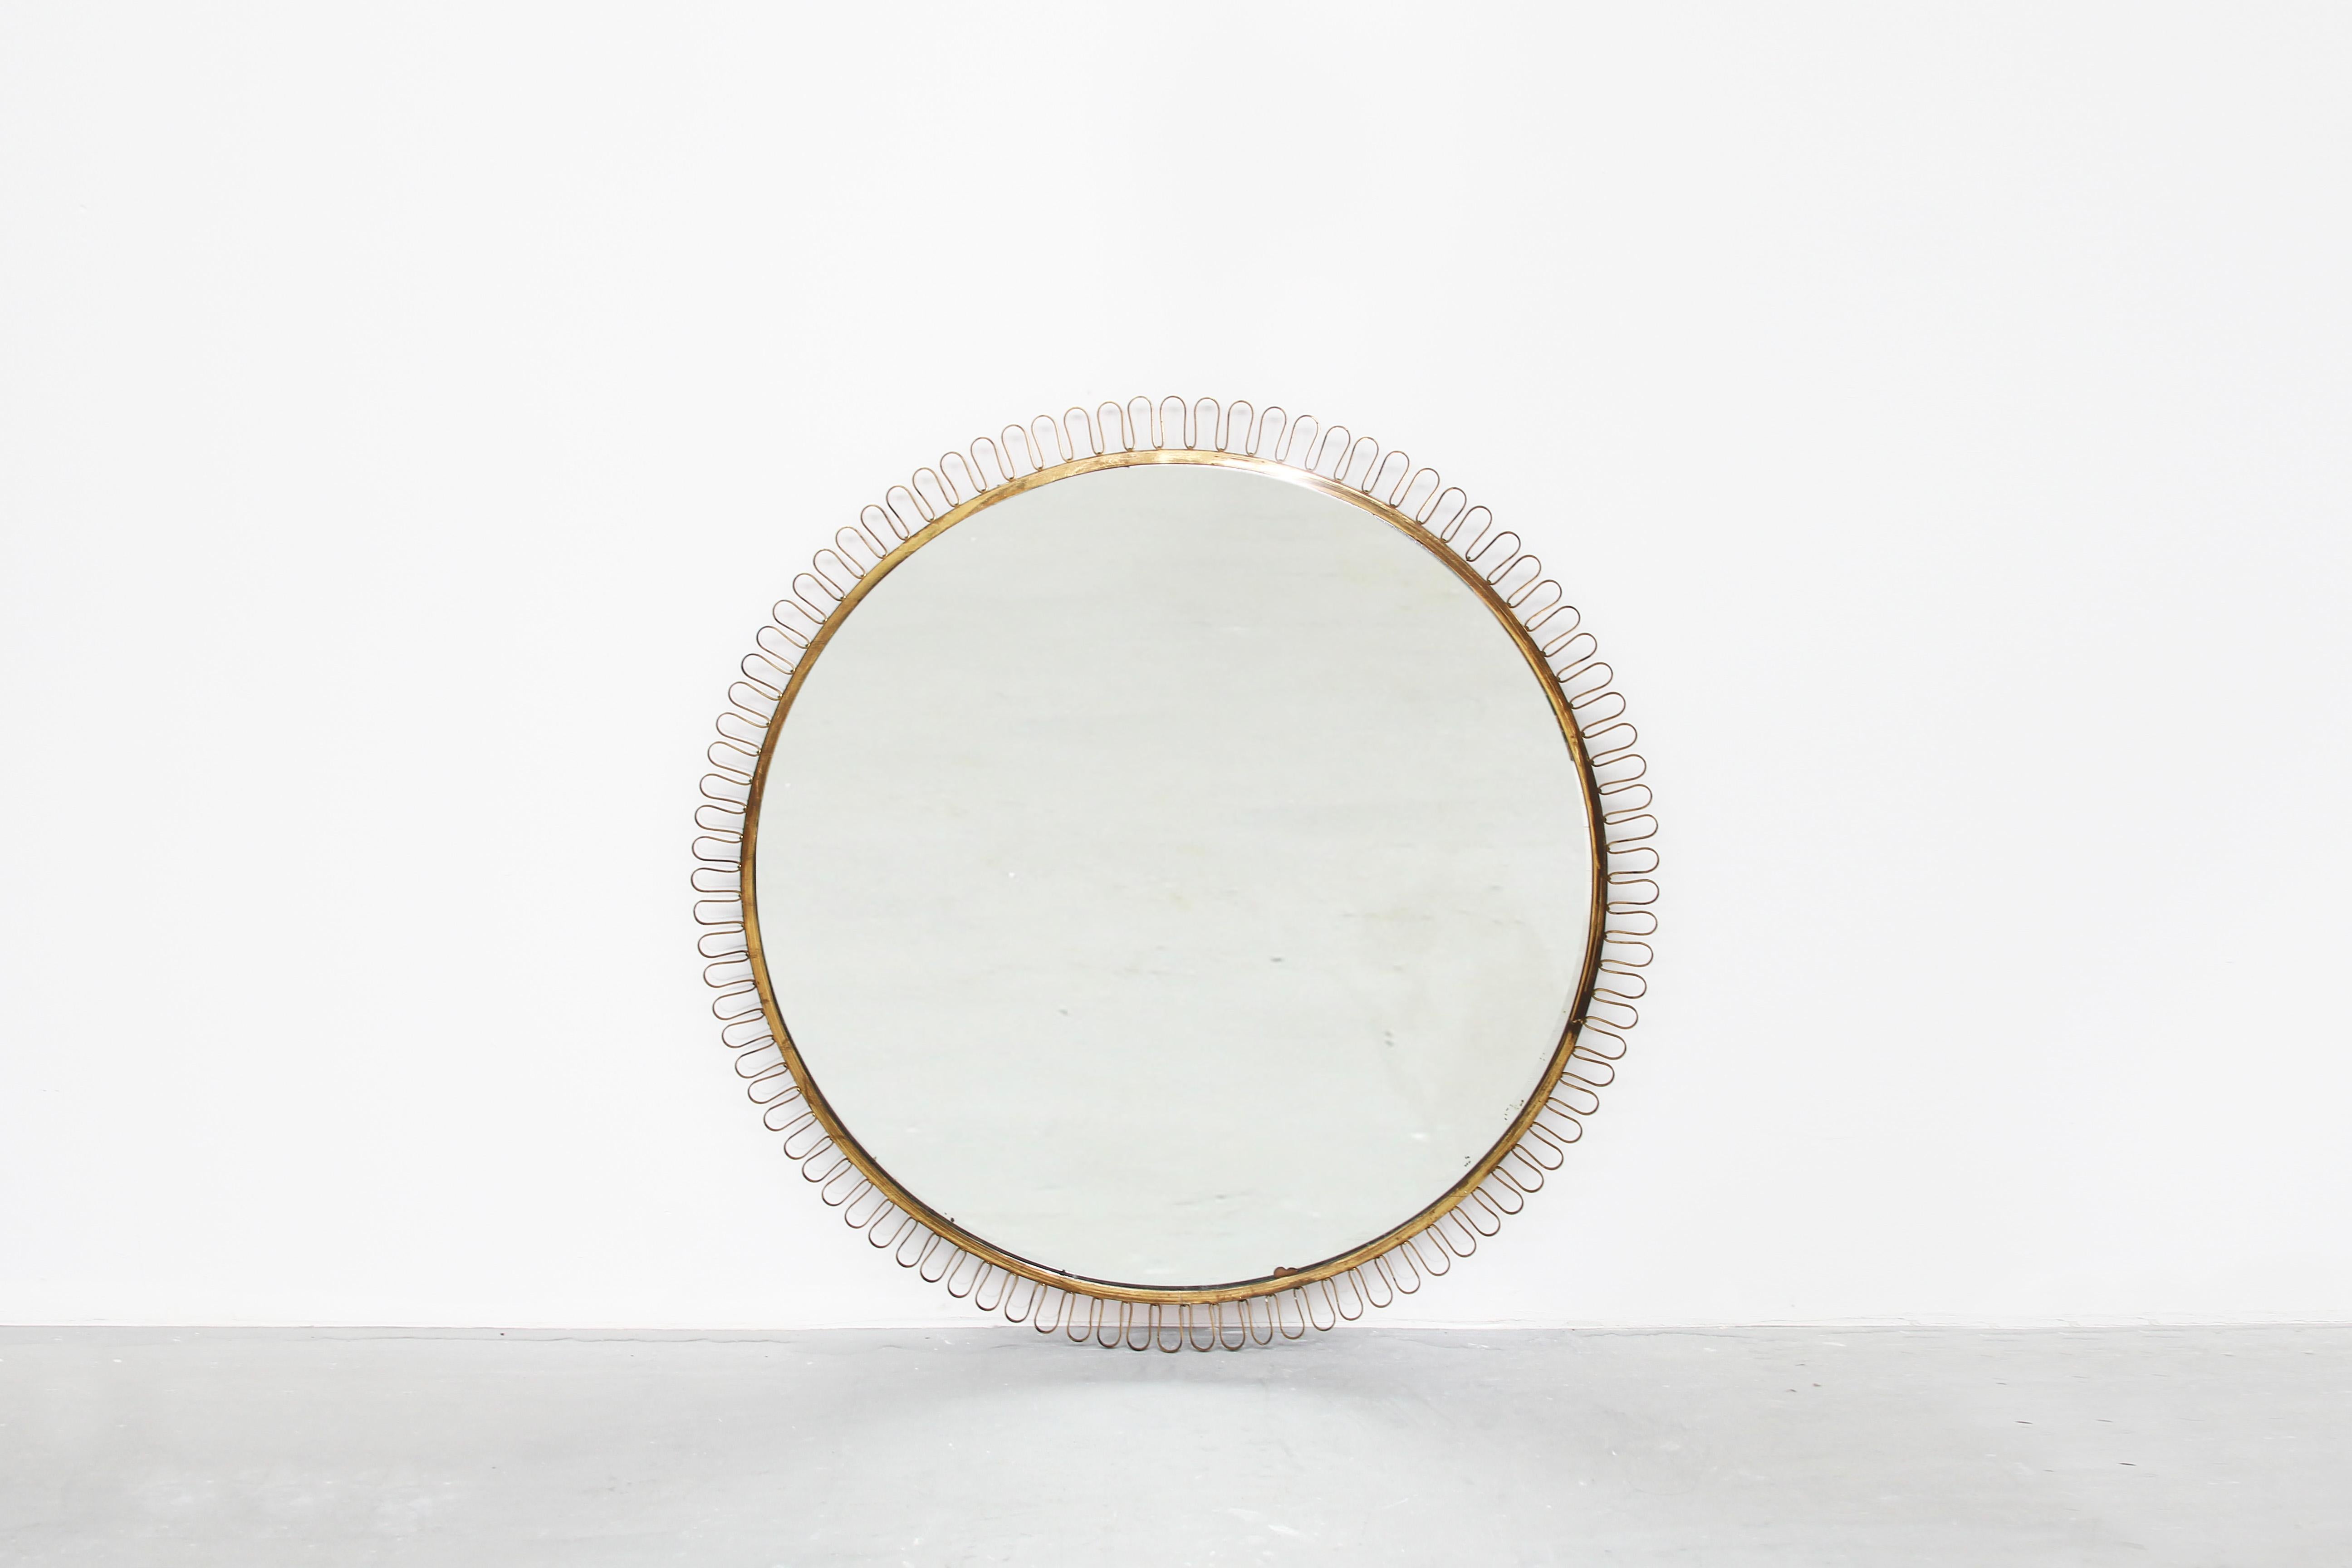 Amazing huge round wall mirror attributed to Josef Frank for Svenskt Tenn, Sweden, 1940s.
The mirror itself shows some patina: There are some little stains and light discoloration on some parts, but it is looking very beautiful! Dimensions: 100cm